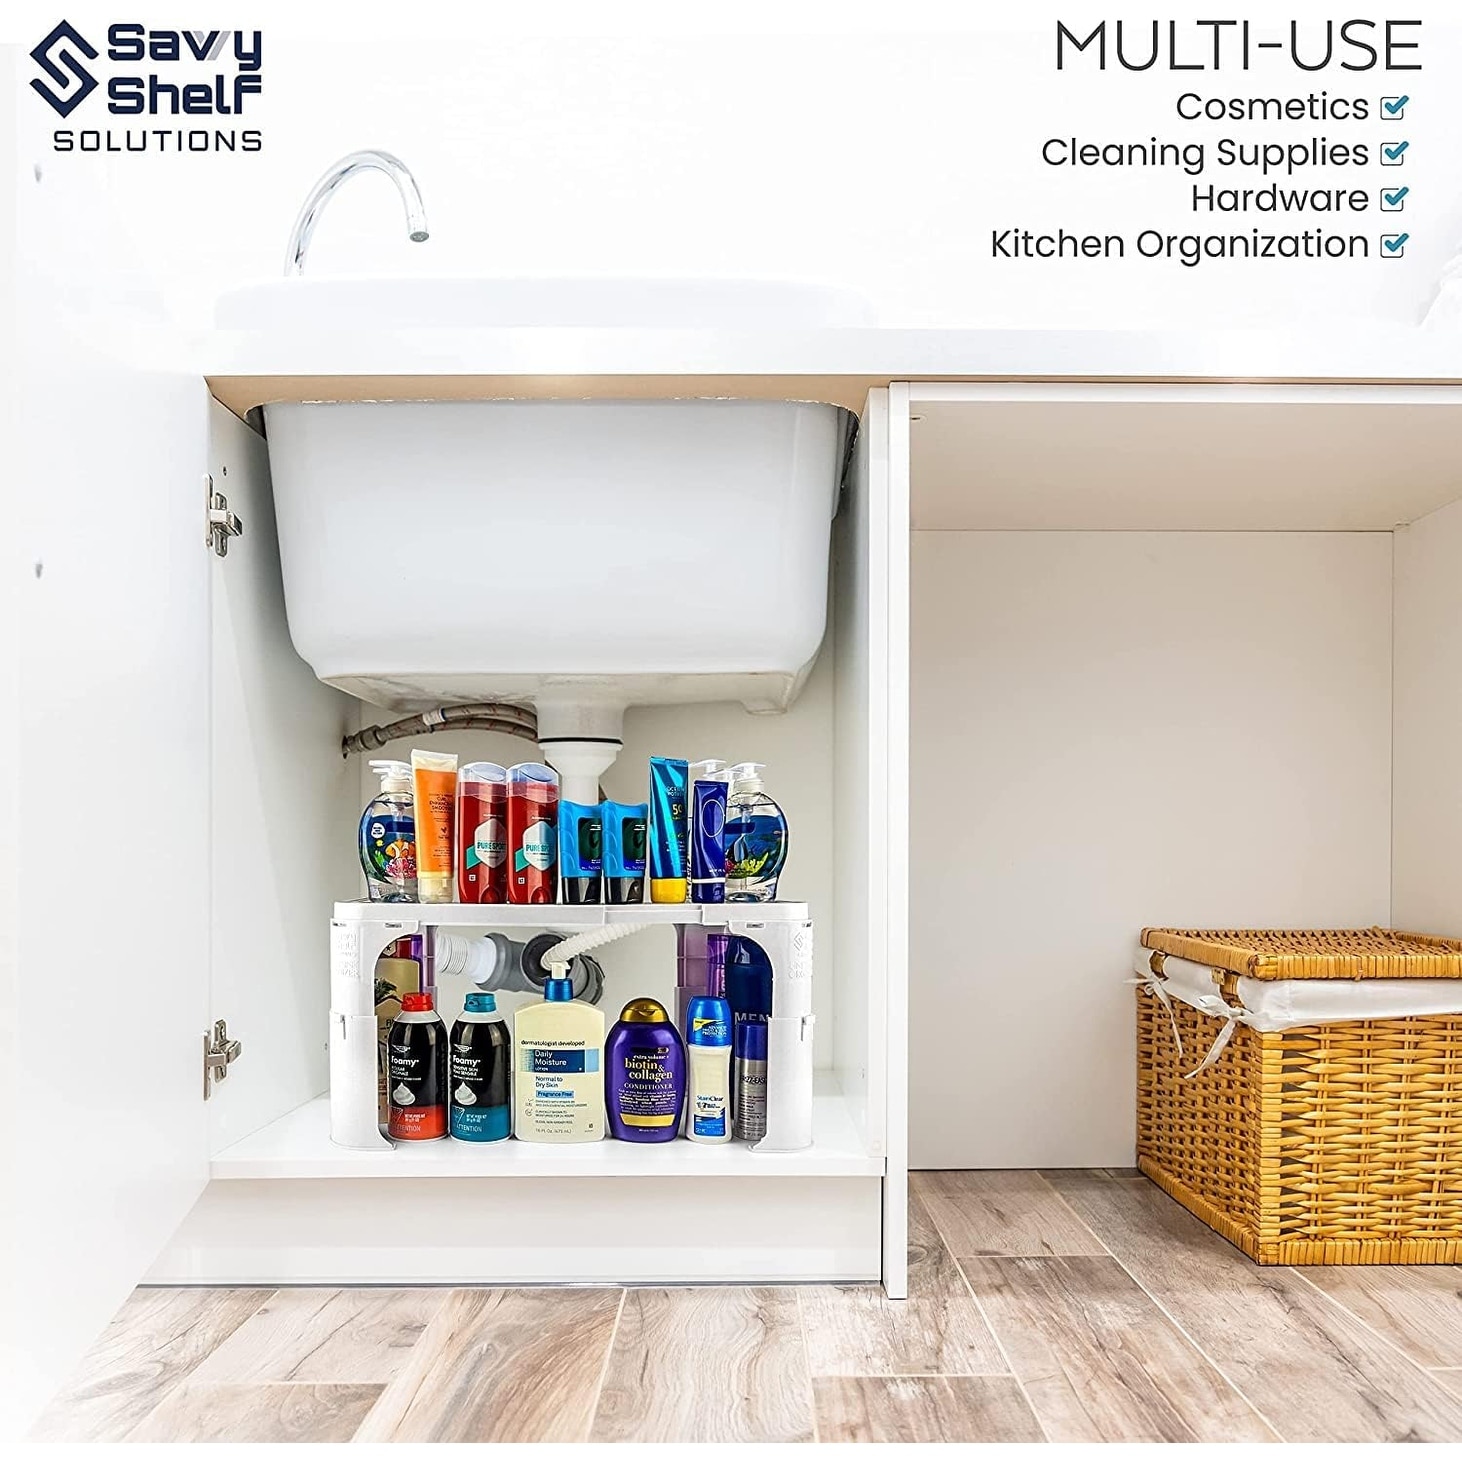 https://ak1.ostkcdn.com/images/products/is/images/direct/5df535538225f1c02319246ec7732cf33c5c2f64/Expandable-Under-Sink-Organizer-and-Storage.jpg